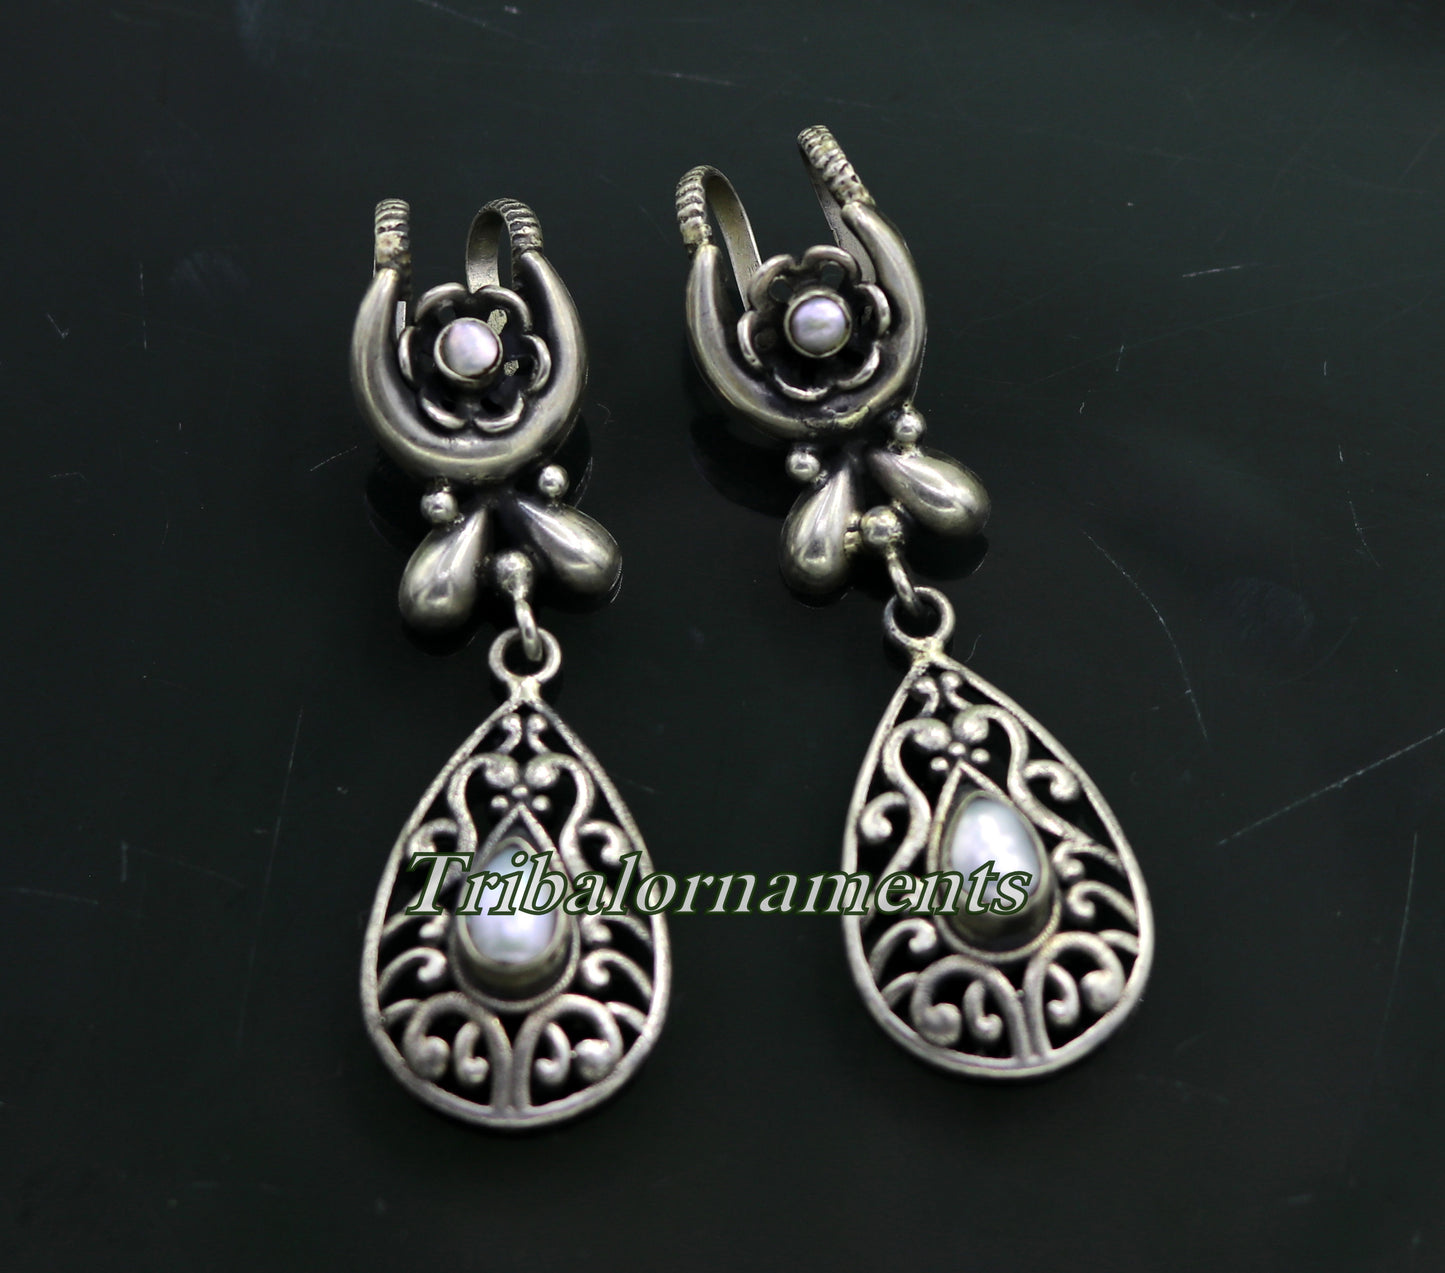 Vintage traditional design handmade 925 sterling silver ear plug ear clip cartilage earring ,excellent party belly dance tribal jewelry s842 - TRIBAL ORNAMENTS